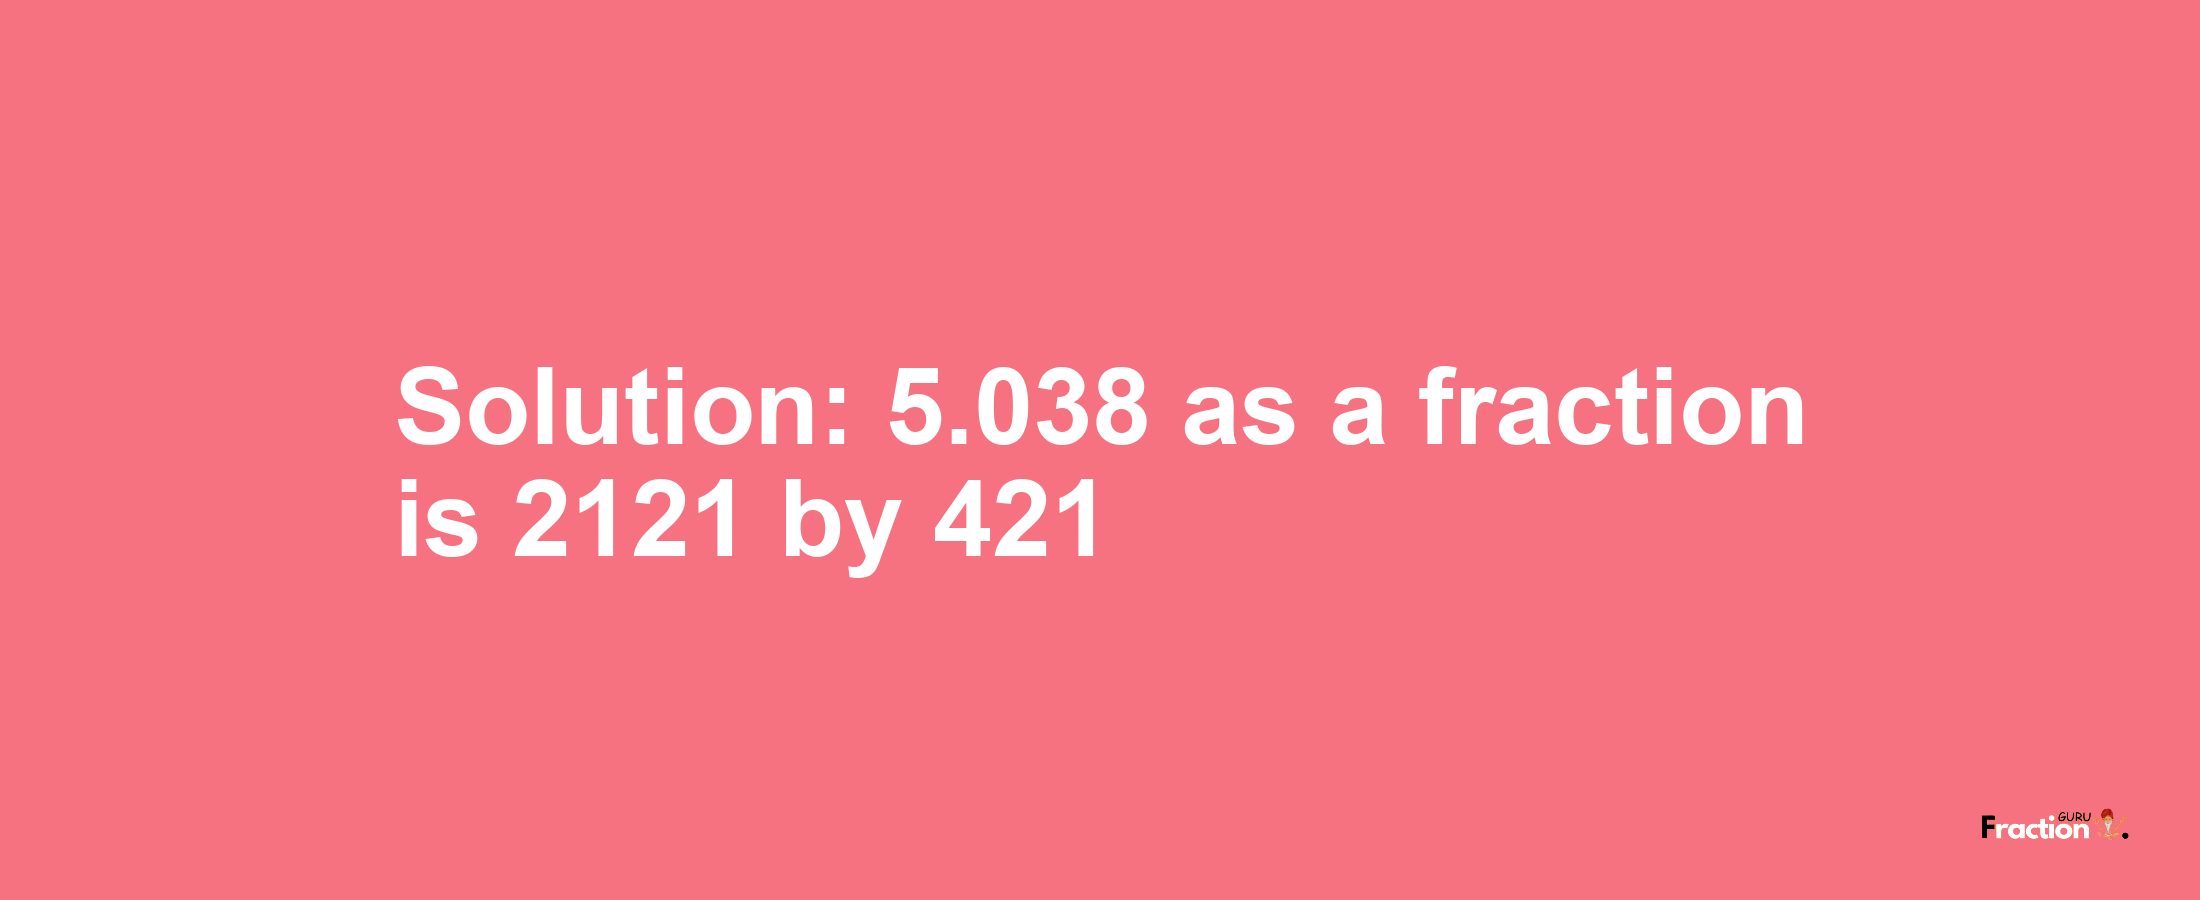 Solution:5.038 as a fraction is 2121/421